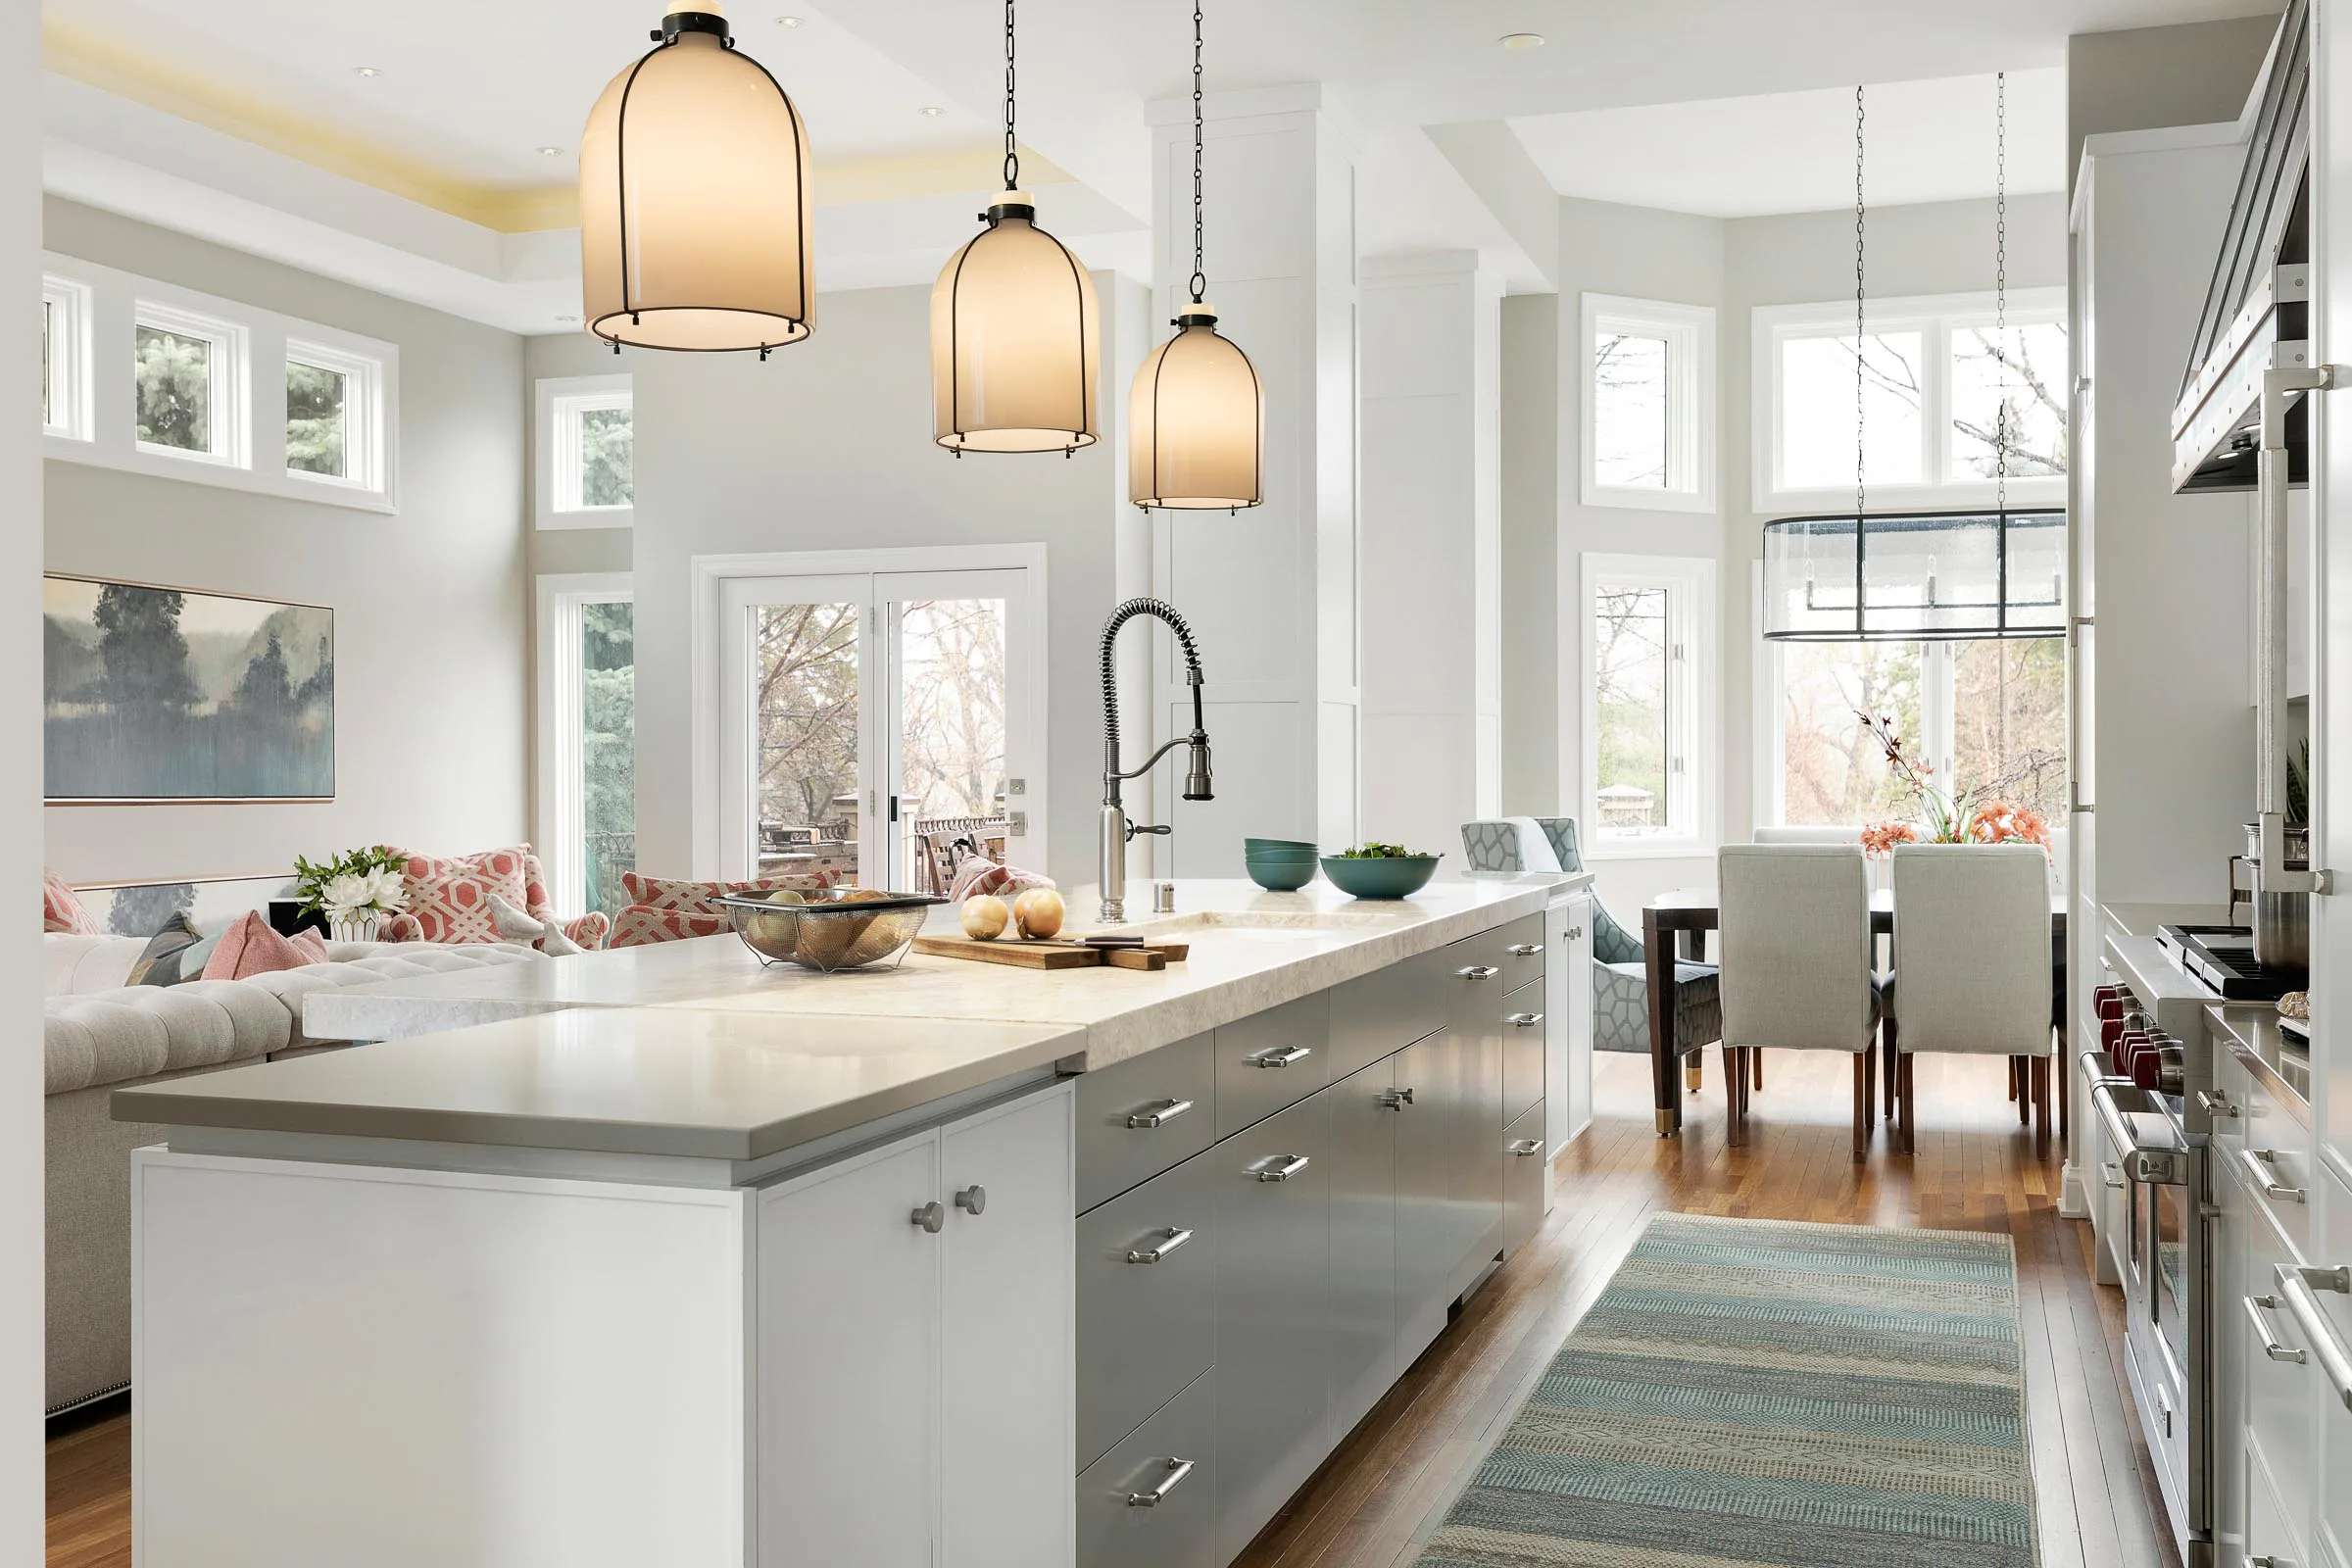 Kitchen island featuring a mix of finishes with gray and white cabinetry, quartz and quartzite countertops in two different thicknesses,  bronze pendant lighting, and white bronze cabinet hardware.